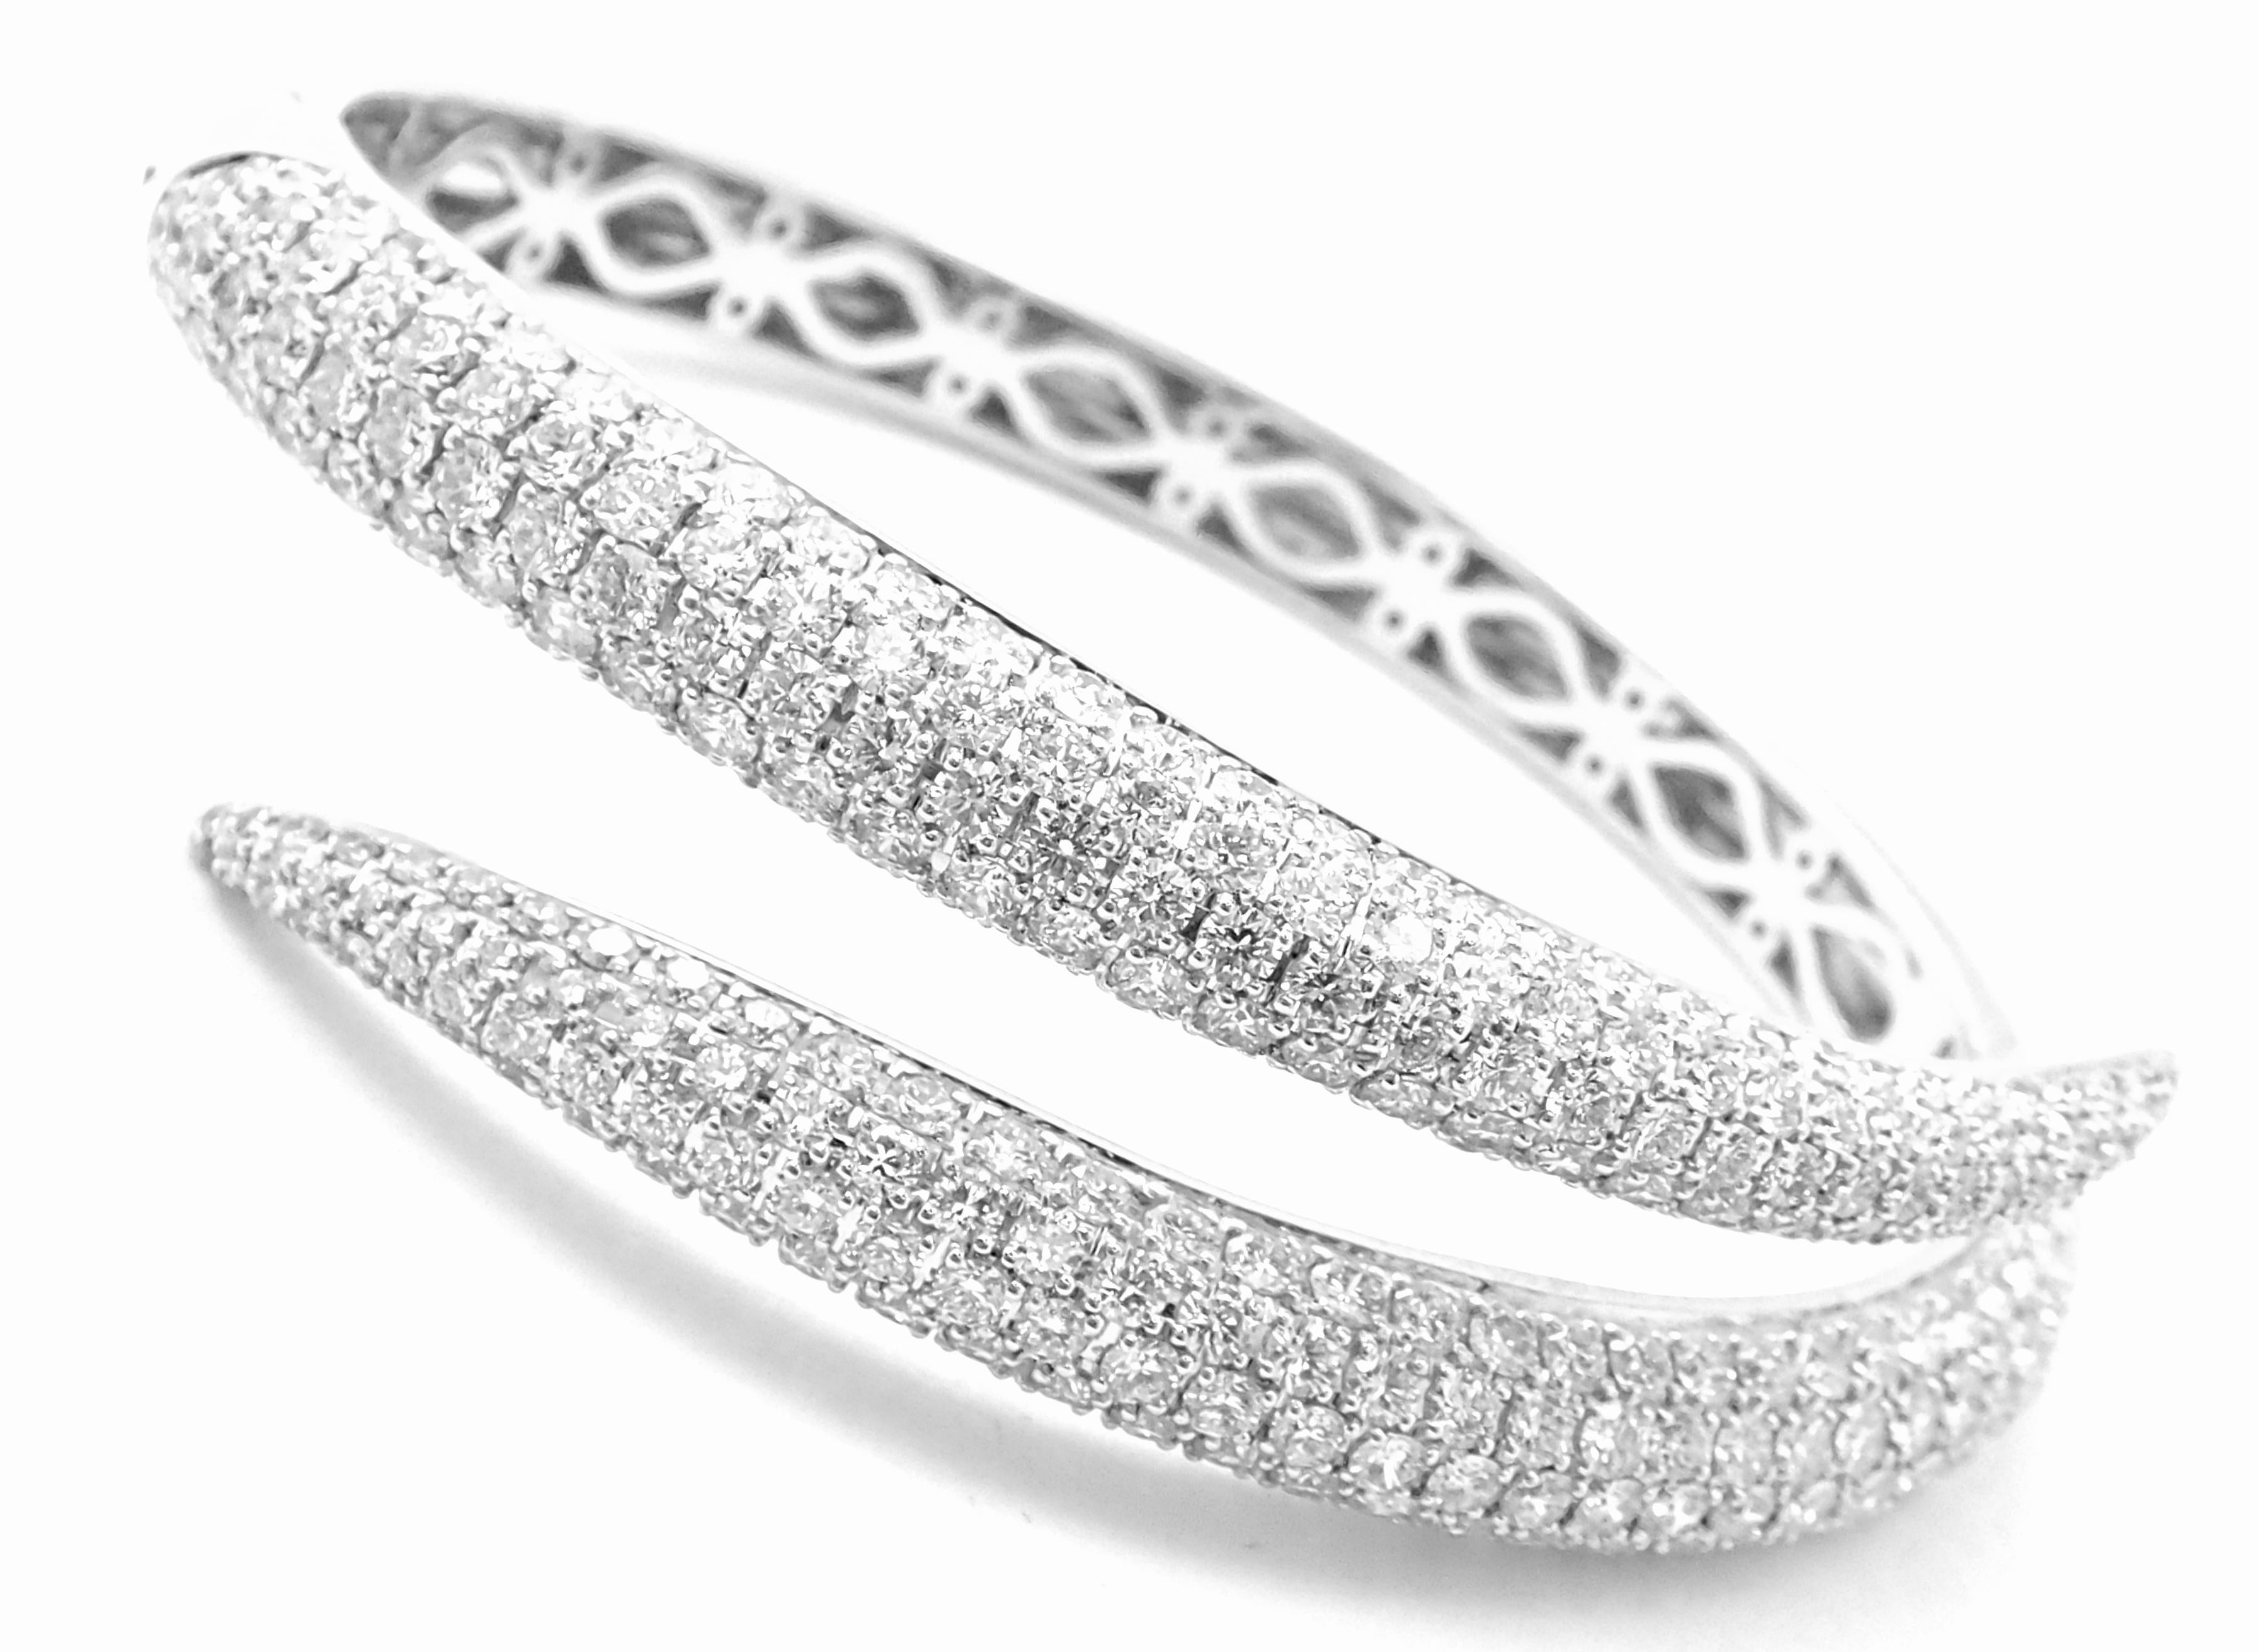 18k White Gold Diamond Ruby Cobra Snake Bangle Bracelet by Roberto Coin.
With 292 High Quality VS1 round brilliant cut diamonds, GH color, total weight approx. 9ct
1 round ruby
Roberto Coin Current Retail Value: $42,000 (plus tax)
Details:
Length: